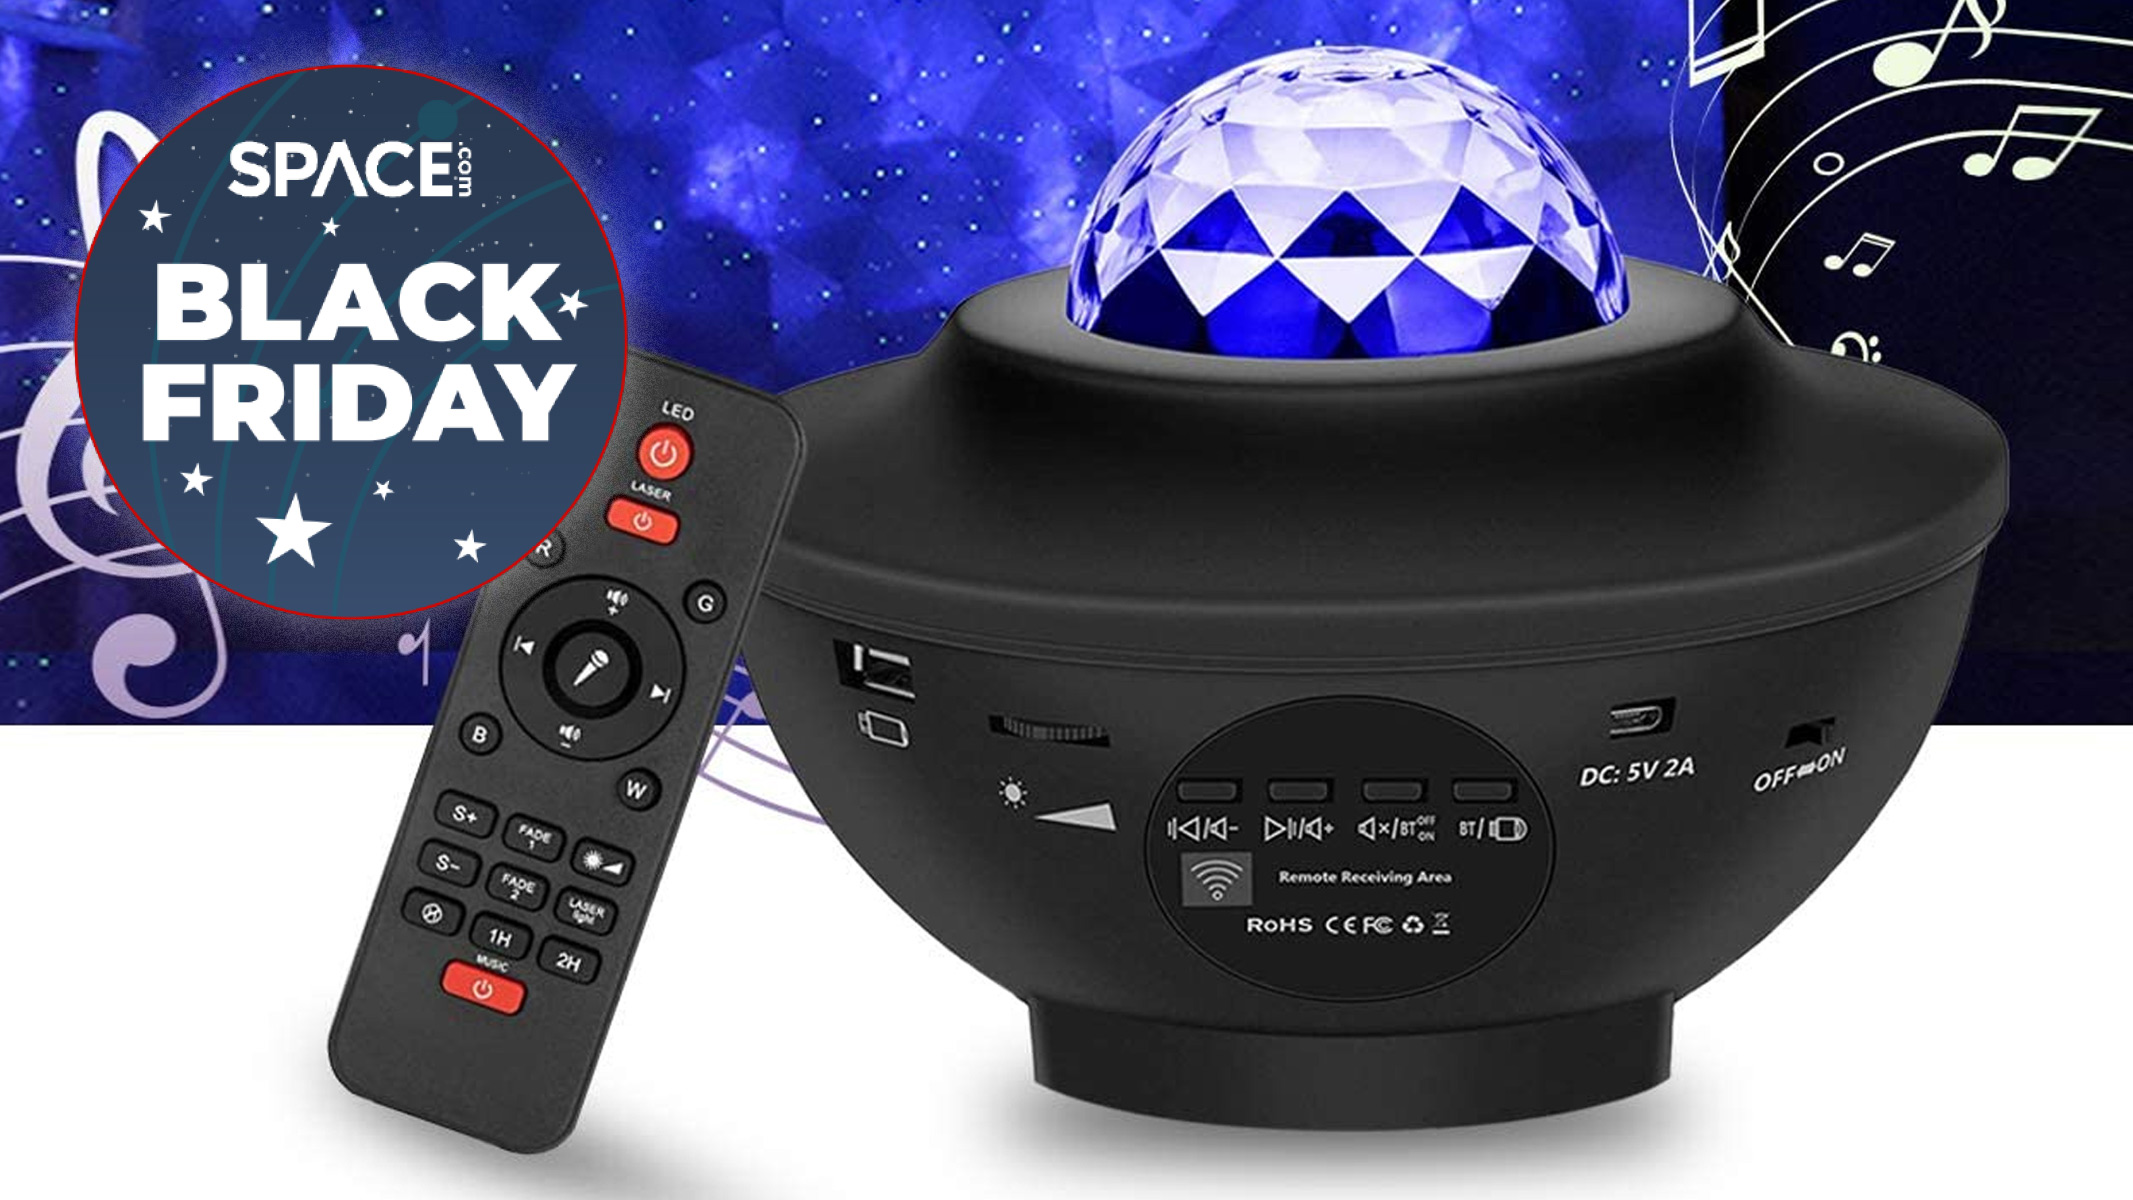 Light up your home with starry nebulas with 42% off this star projector